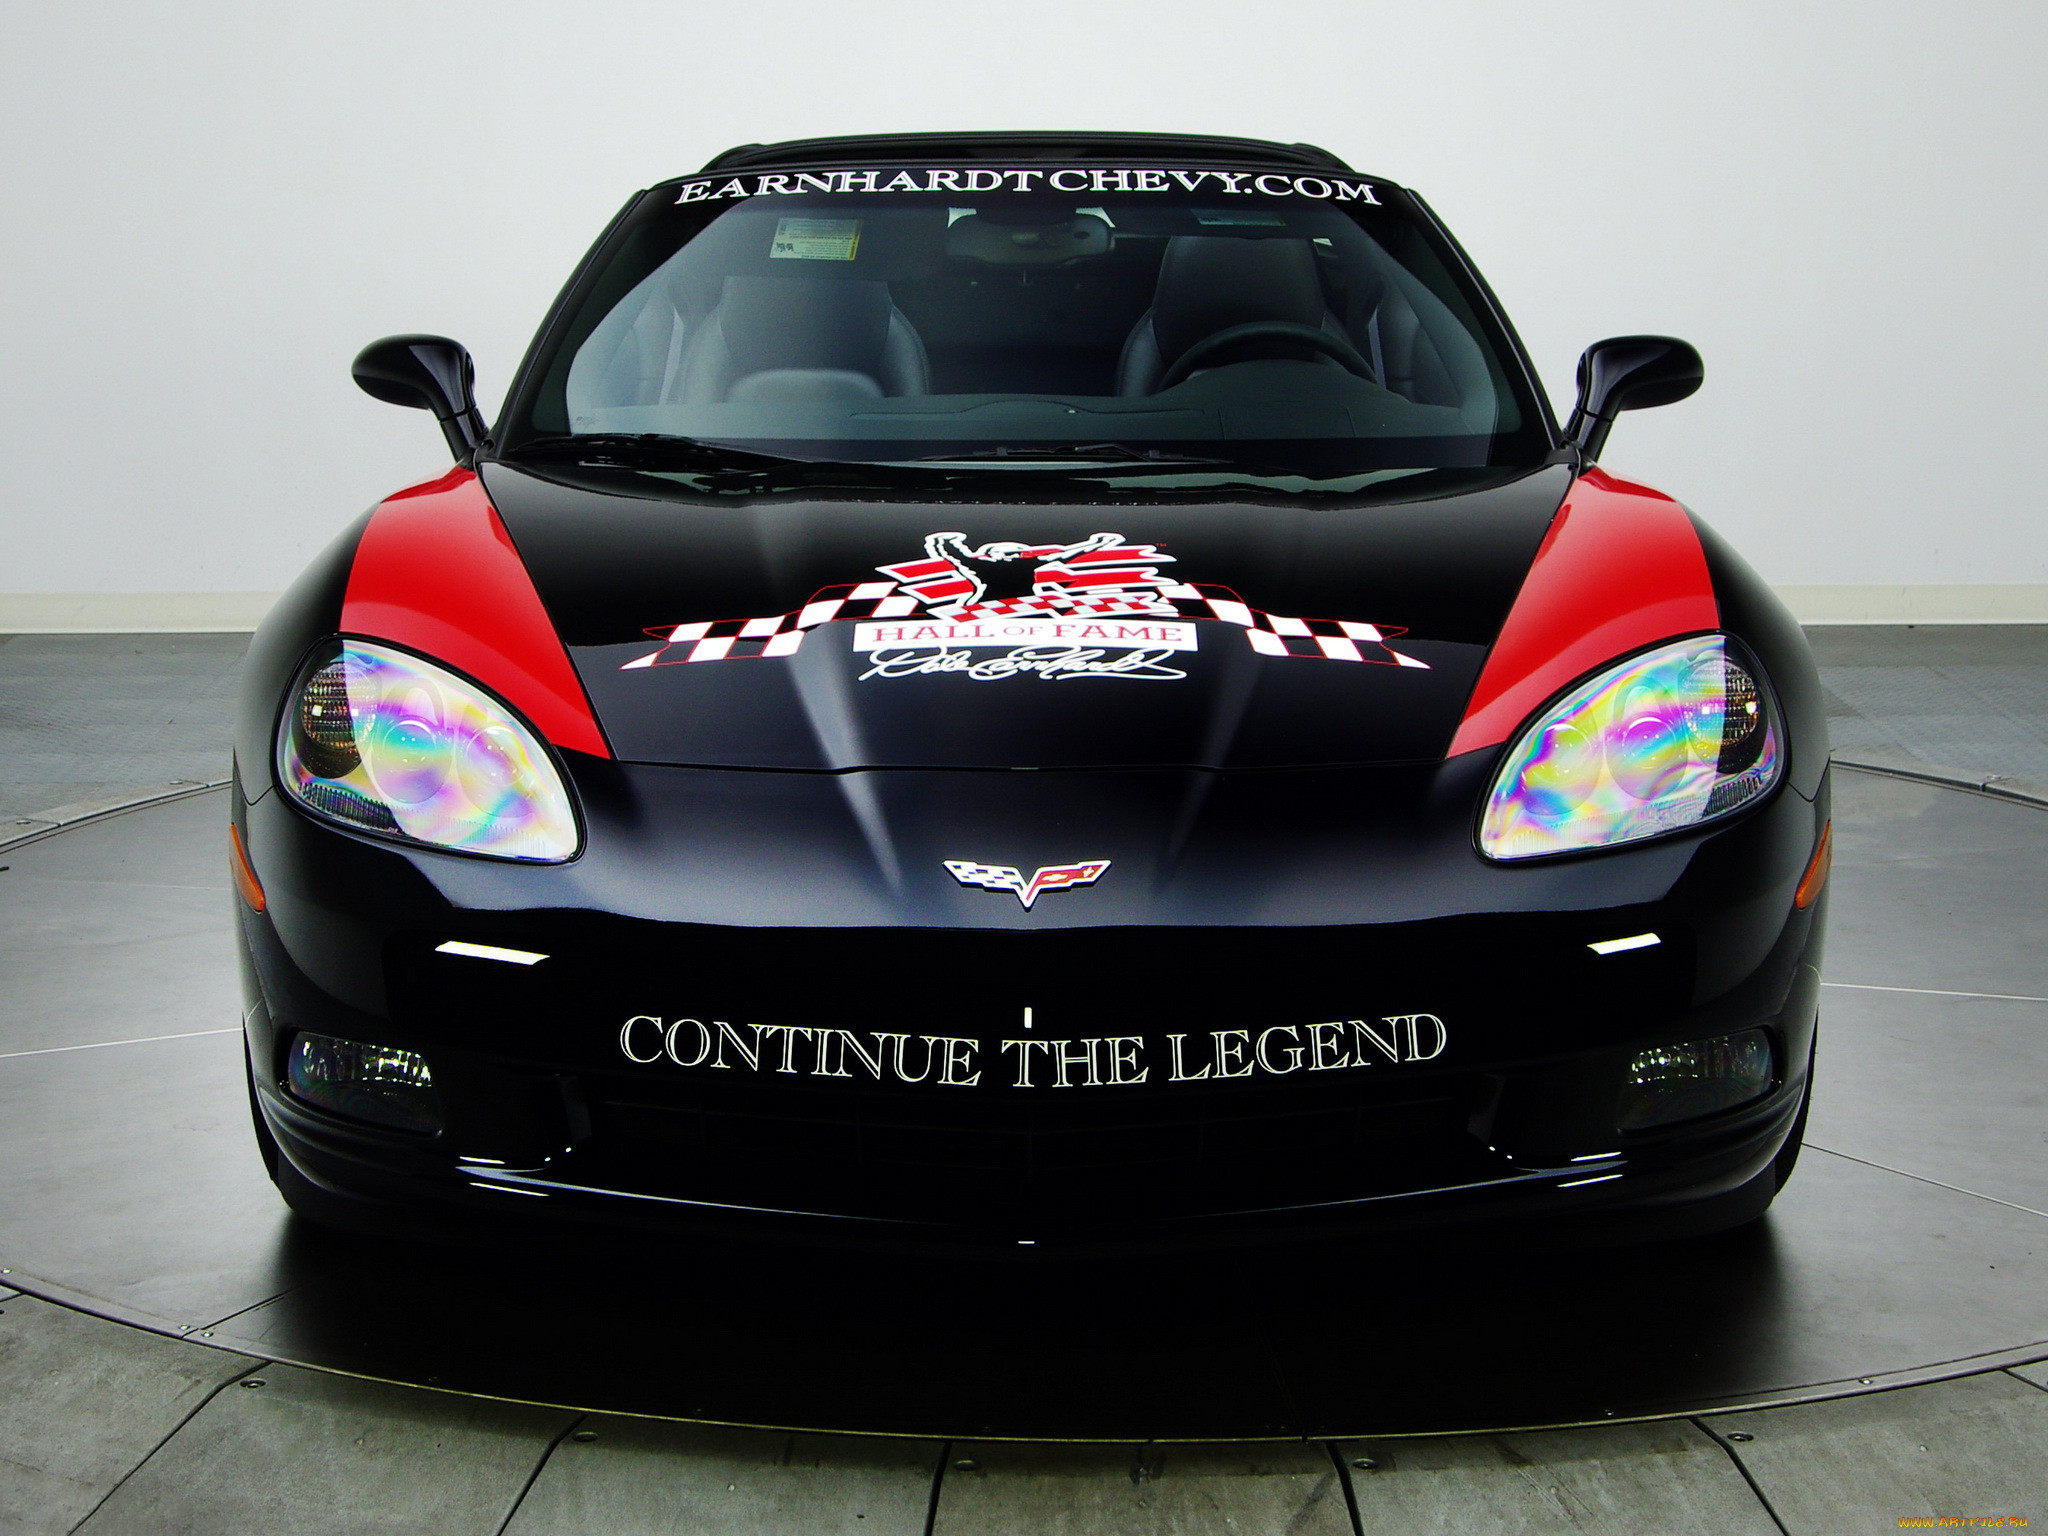 corvette coupe earnhardt hall of fame edition 2010, , corvette, 2010, edition, fame, hall, earnhardt, coupe